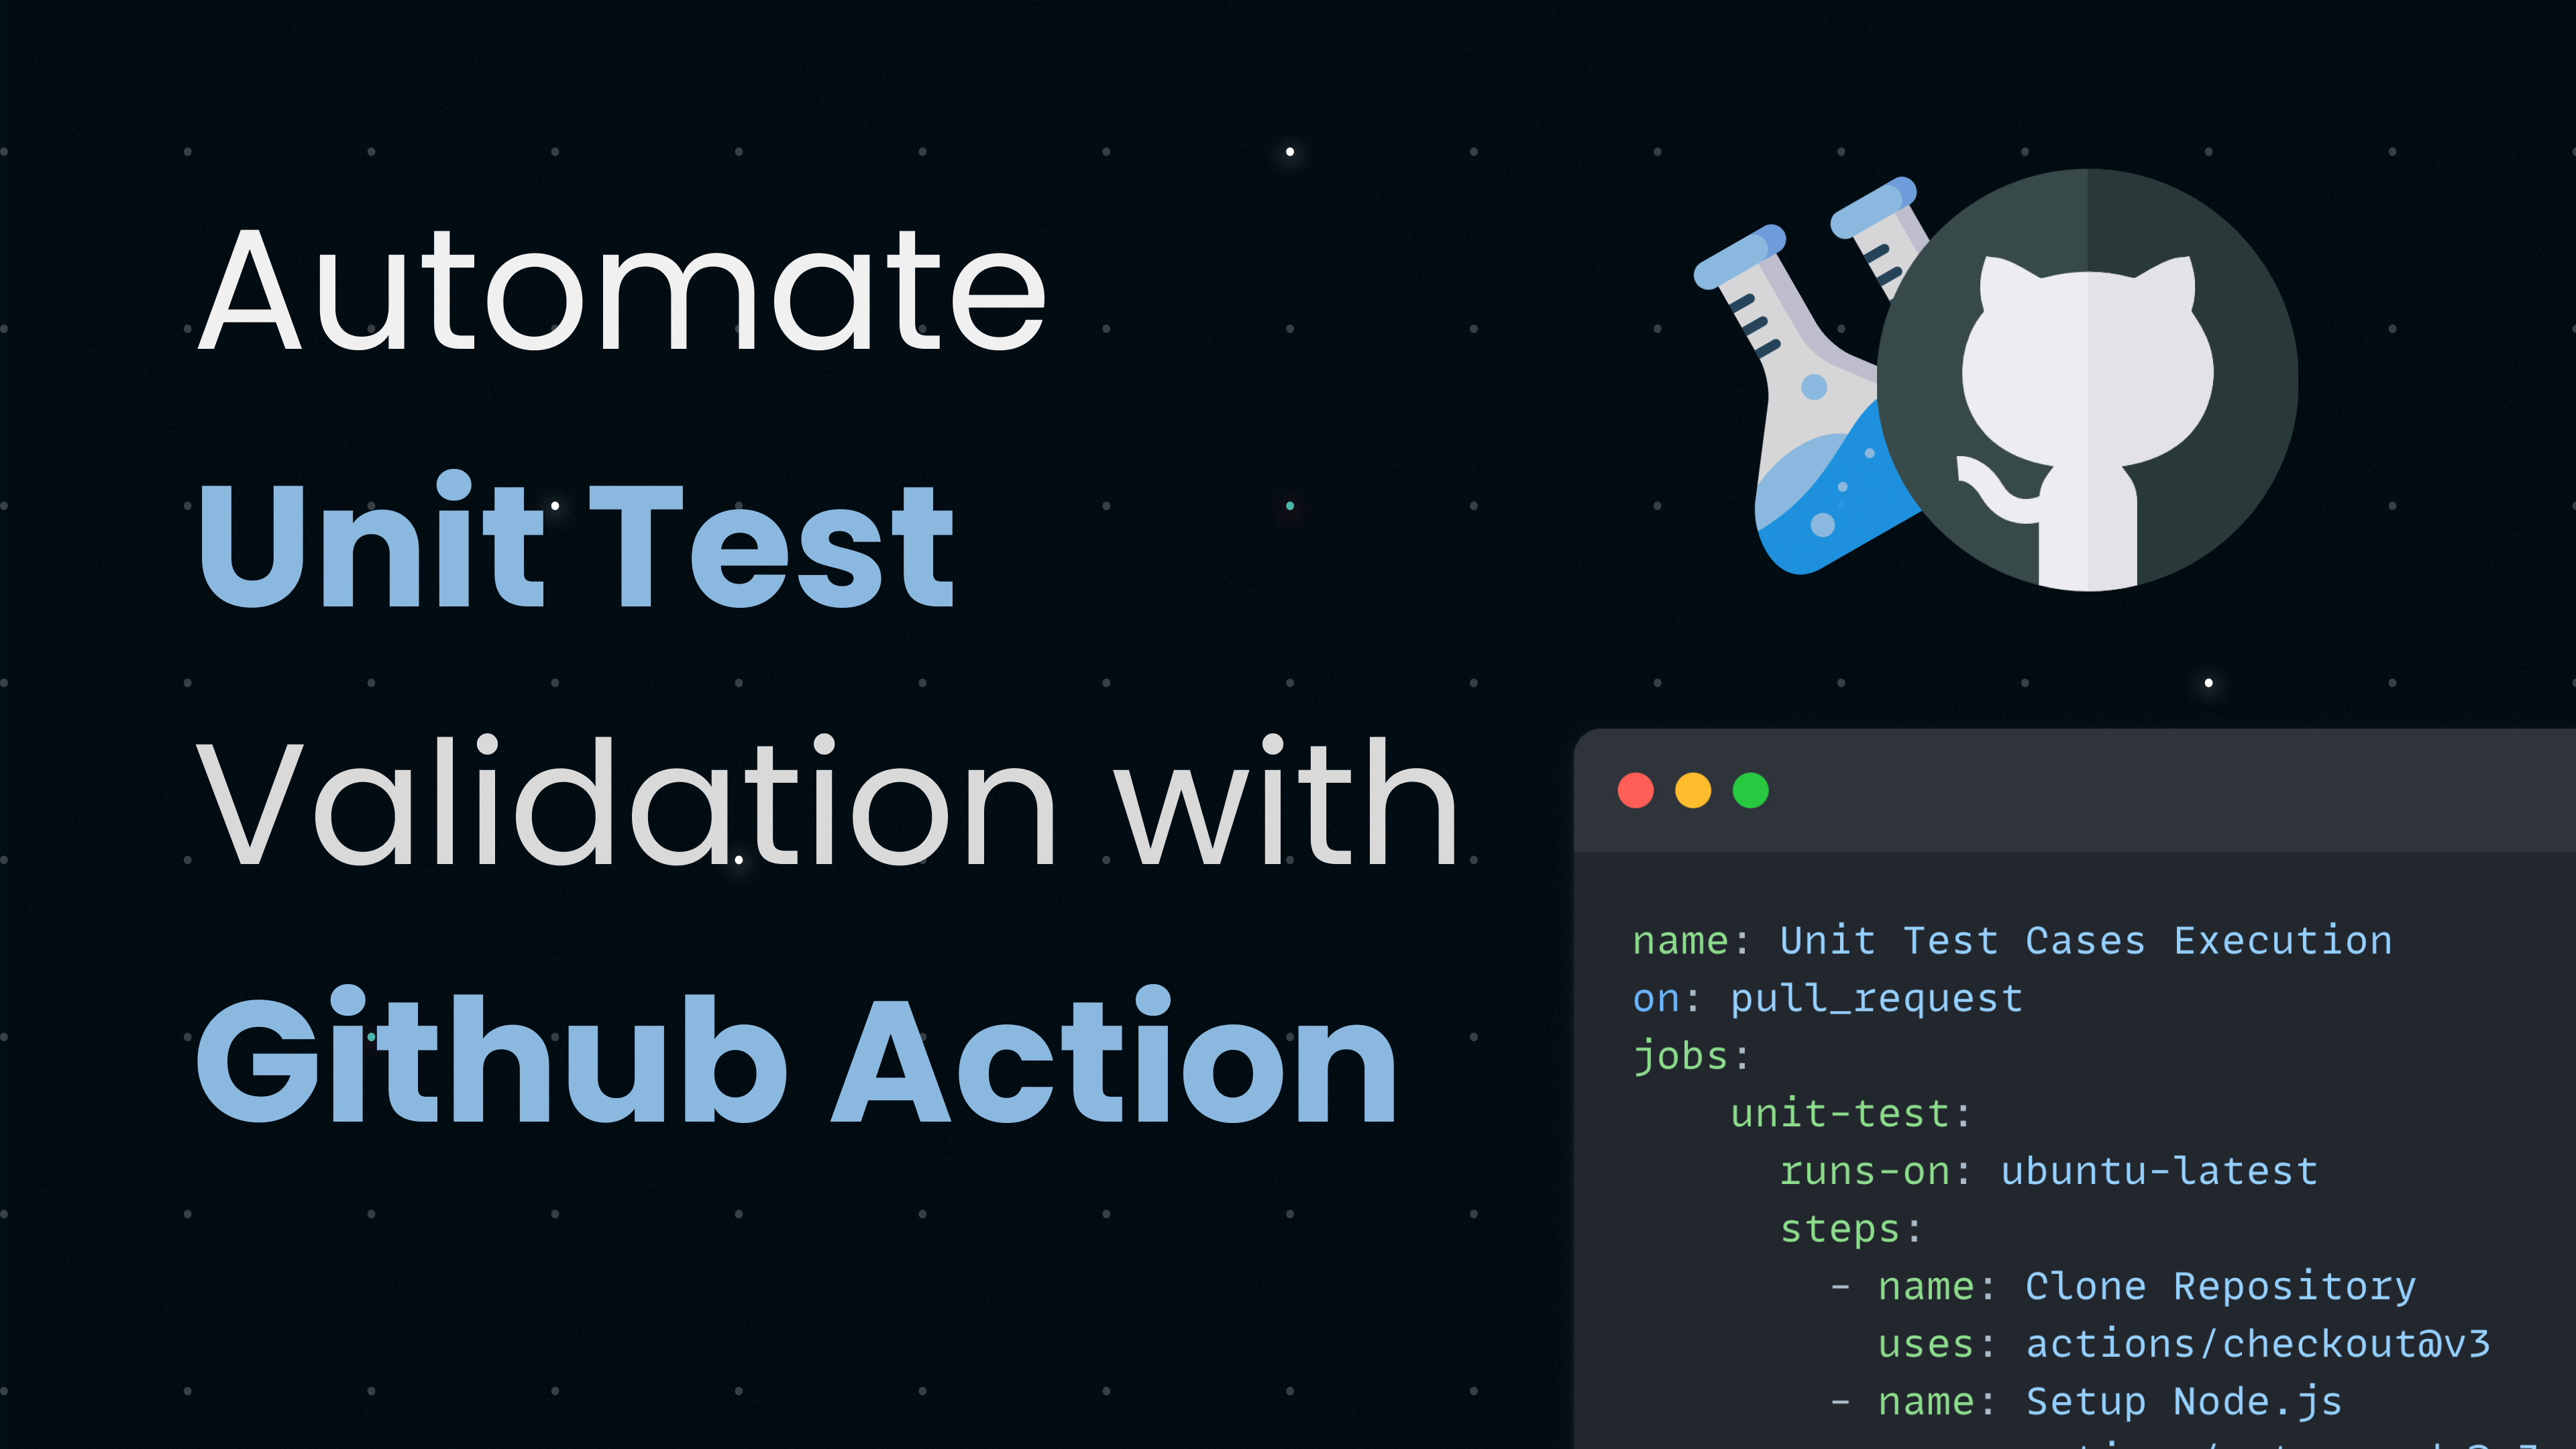 Automate Unit Test Case Validation With Github Action